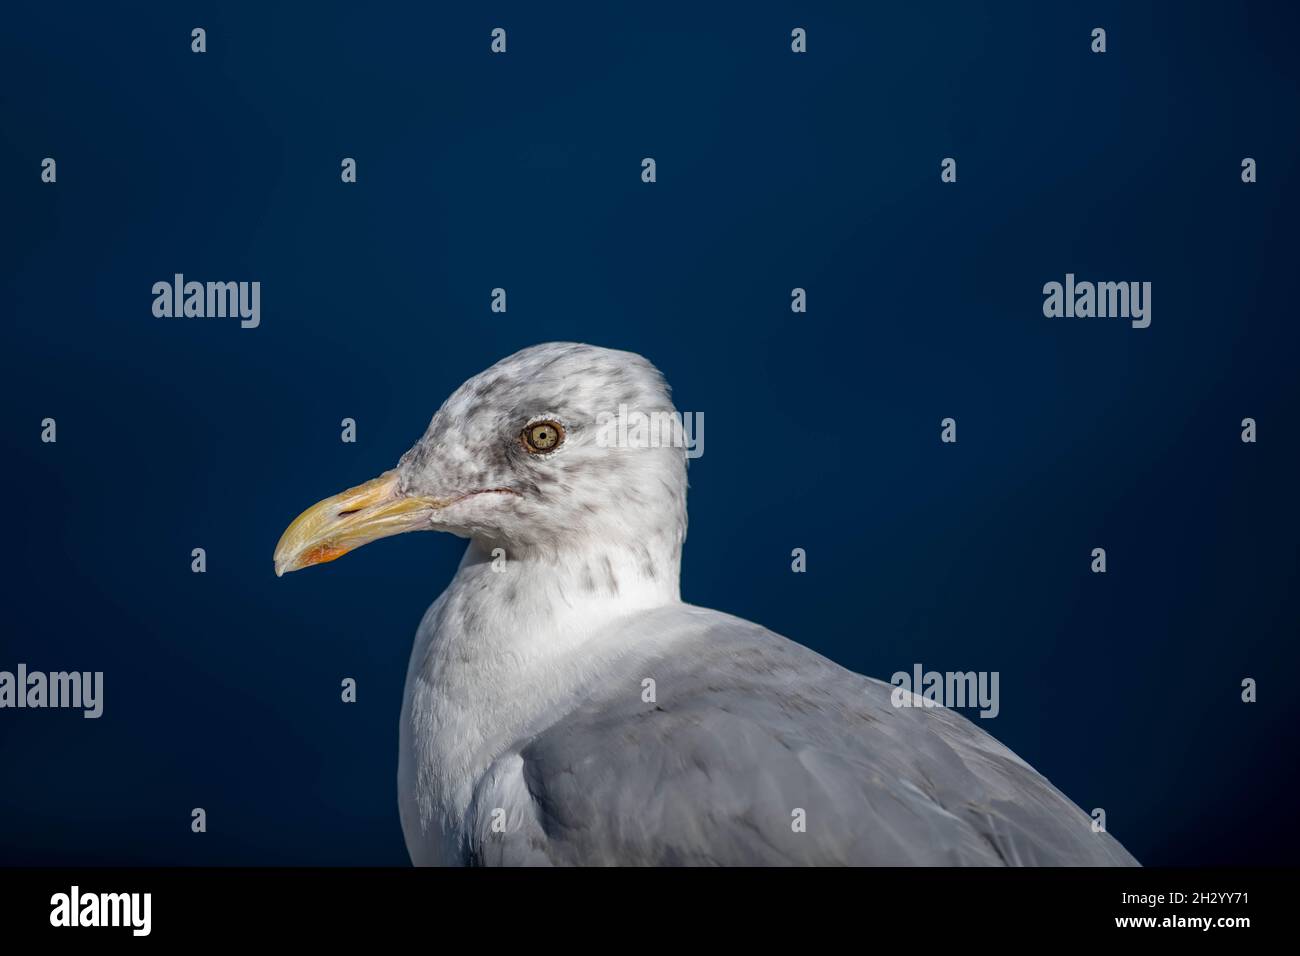 A wild Icelandic gull sitting on snow covered grassy ground. The gull in the foreground has grey wings, a white body, and a yellow beak. Stock Photo